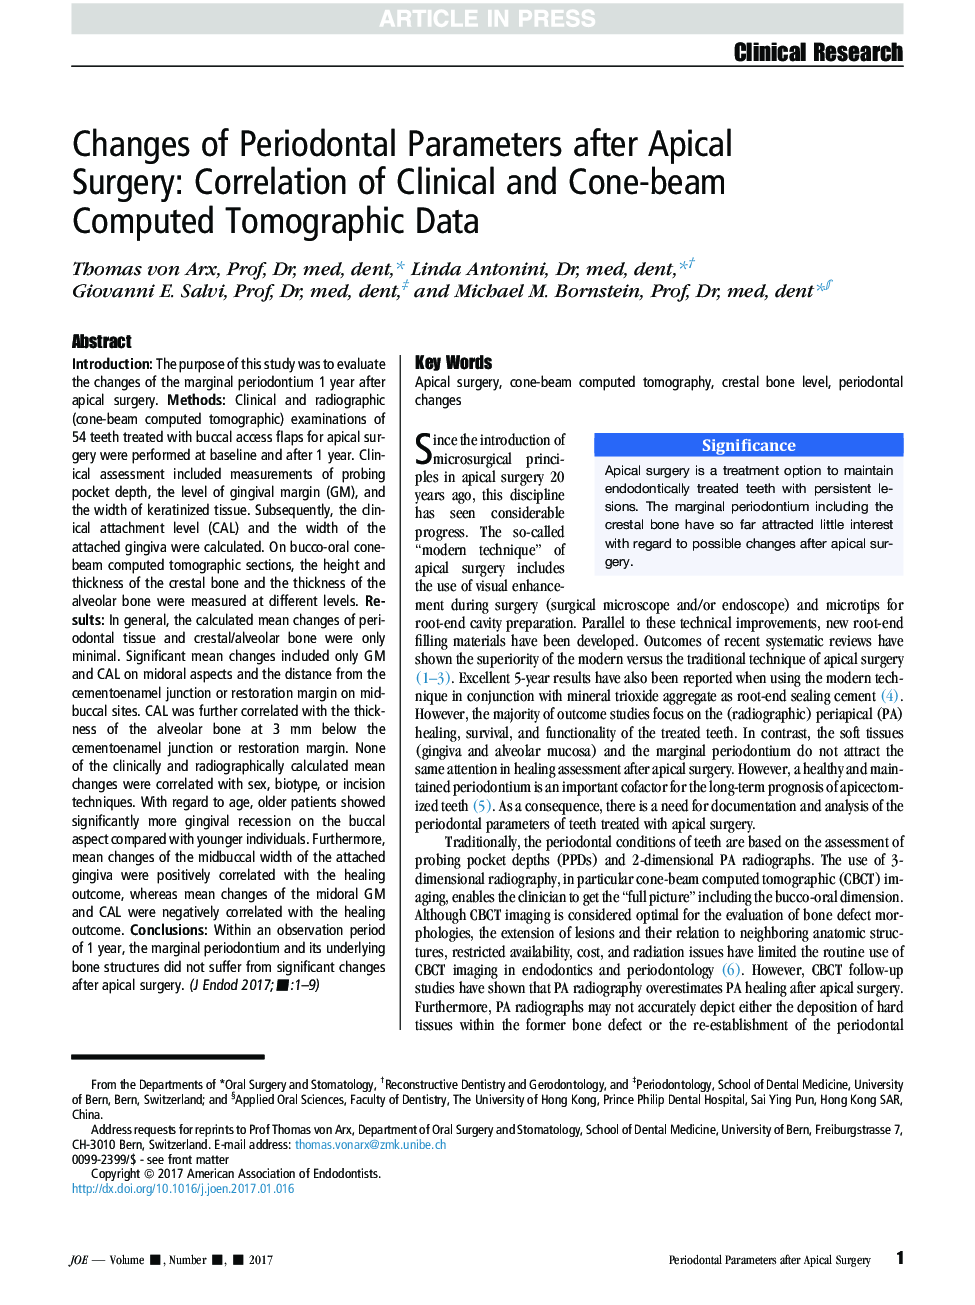 Changes of Periodontal Parameters after Apical Surgery: Correlation of Clinical and Cone-beam Computed Tomographic Data